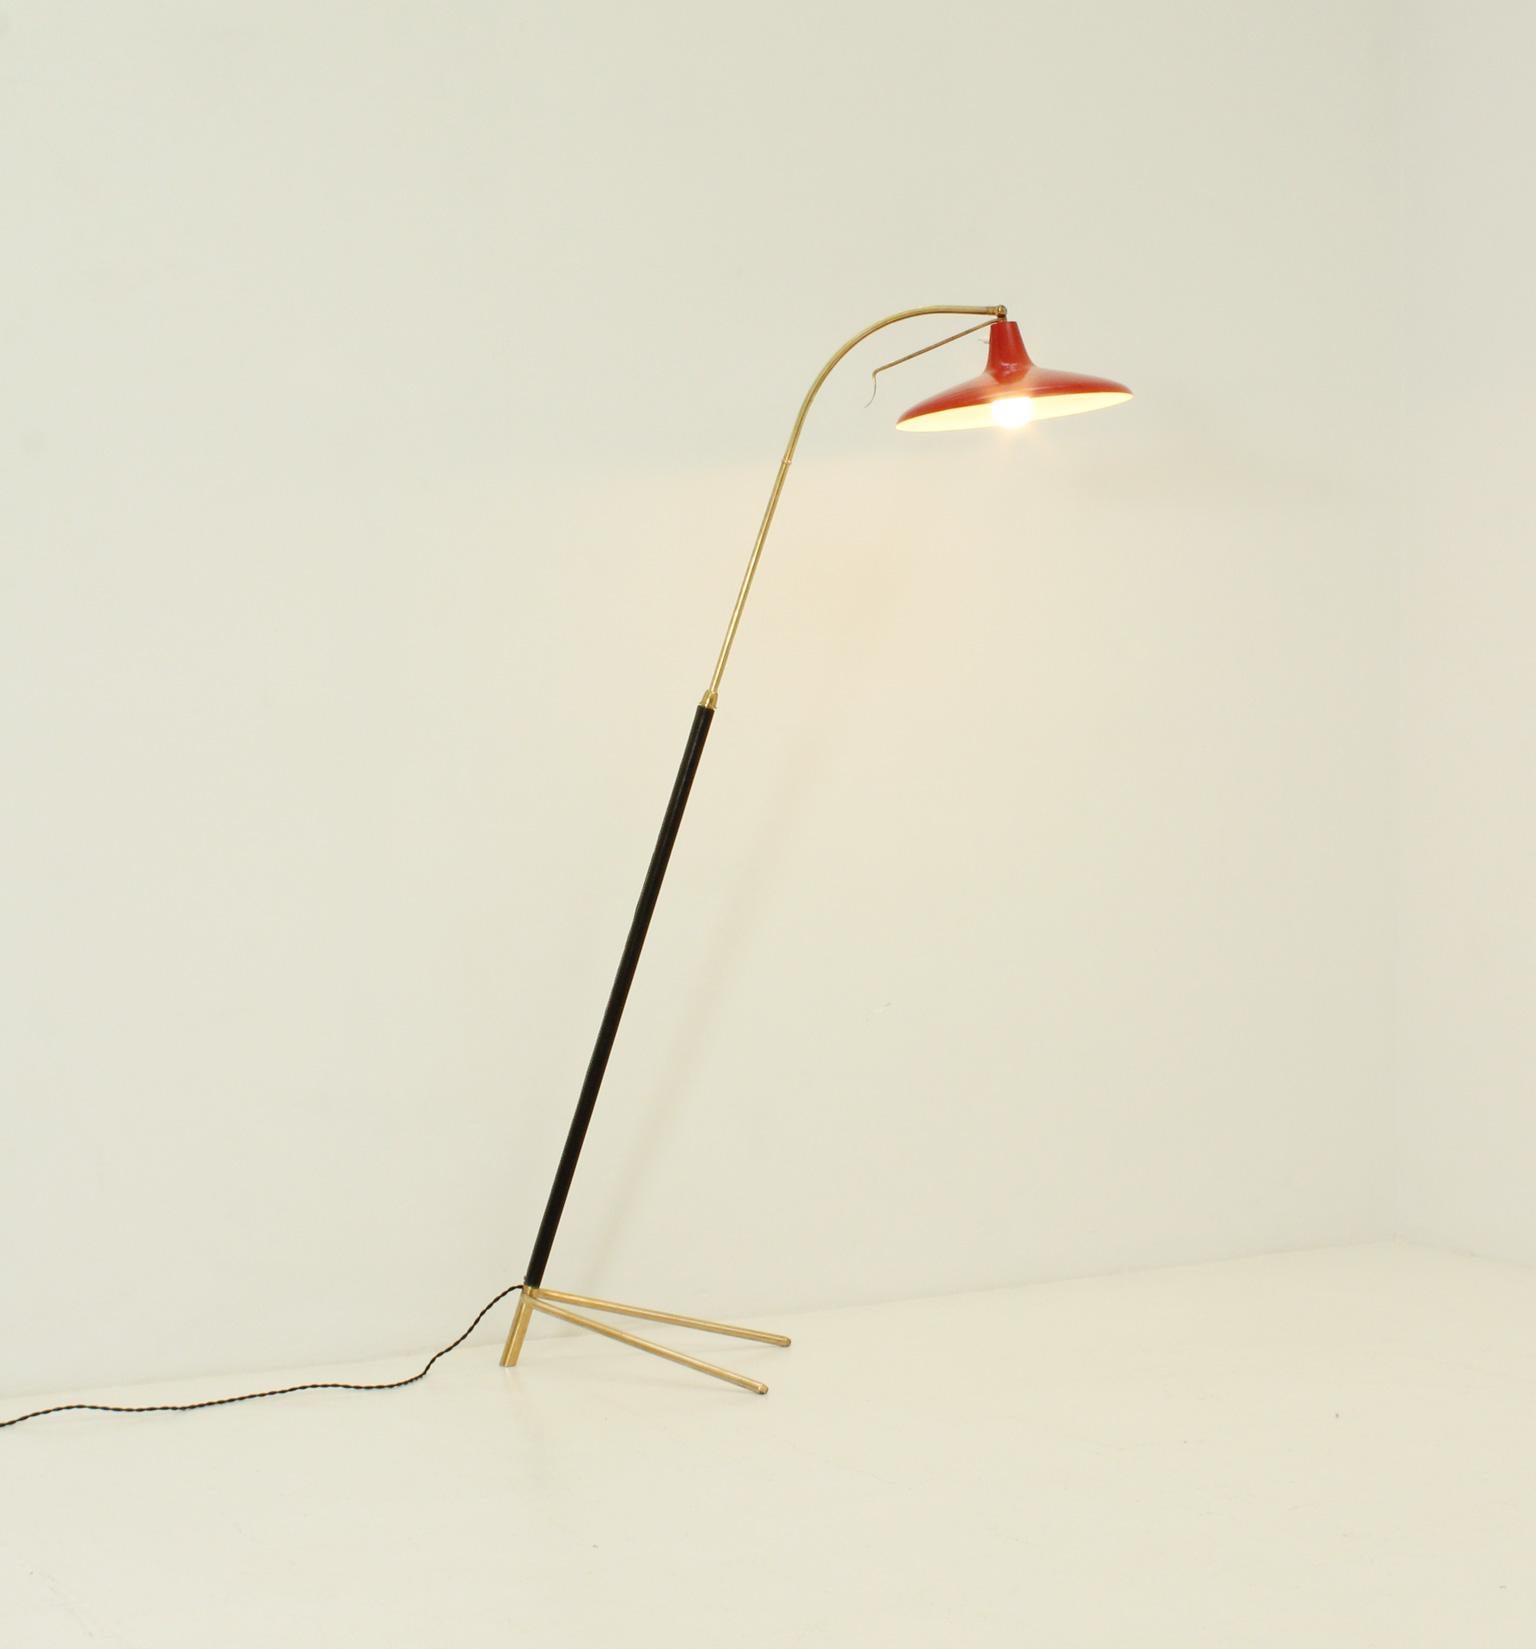 Adjustable Floor Lamp in Brass and Leather, Italy, 1950's For Sale 6